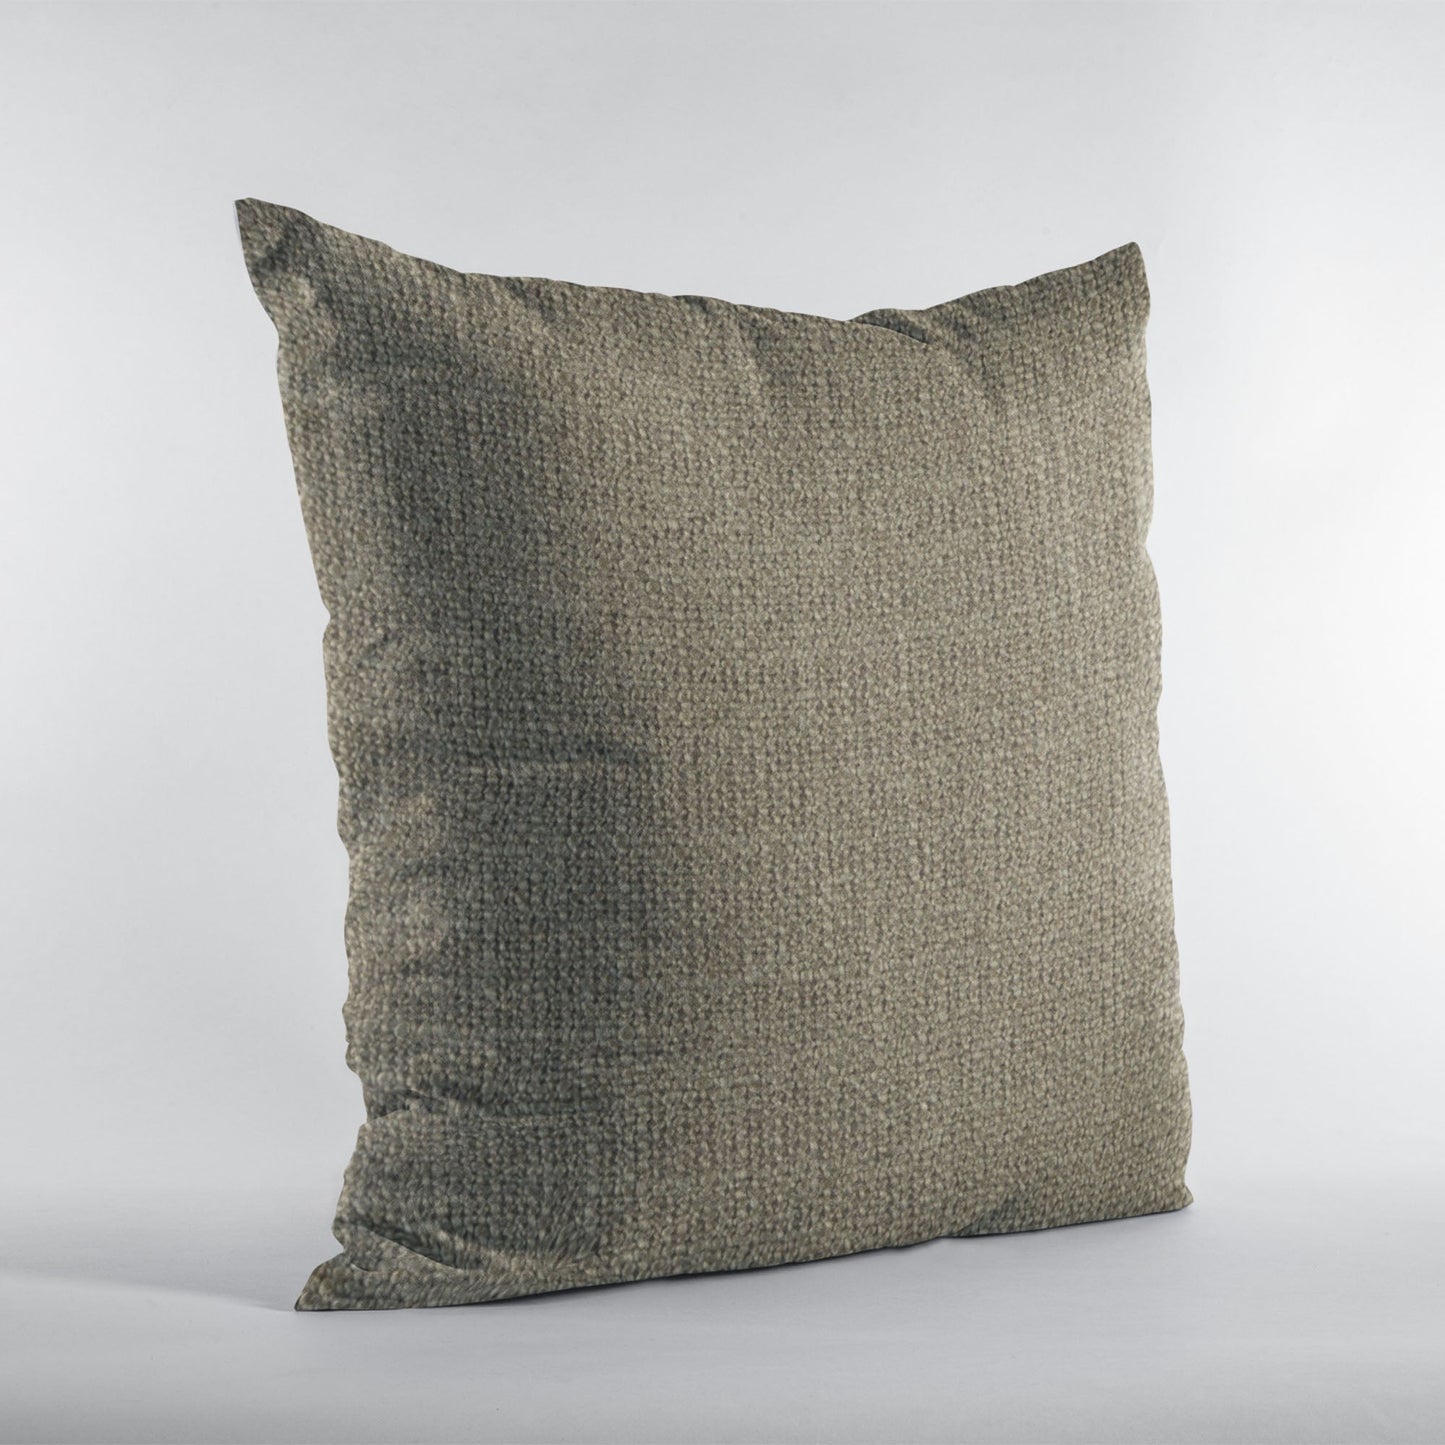 Plutus Hemp Wall Textured Solid, With Open Weave. Luxury Throw Pillow